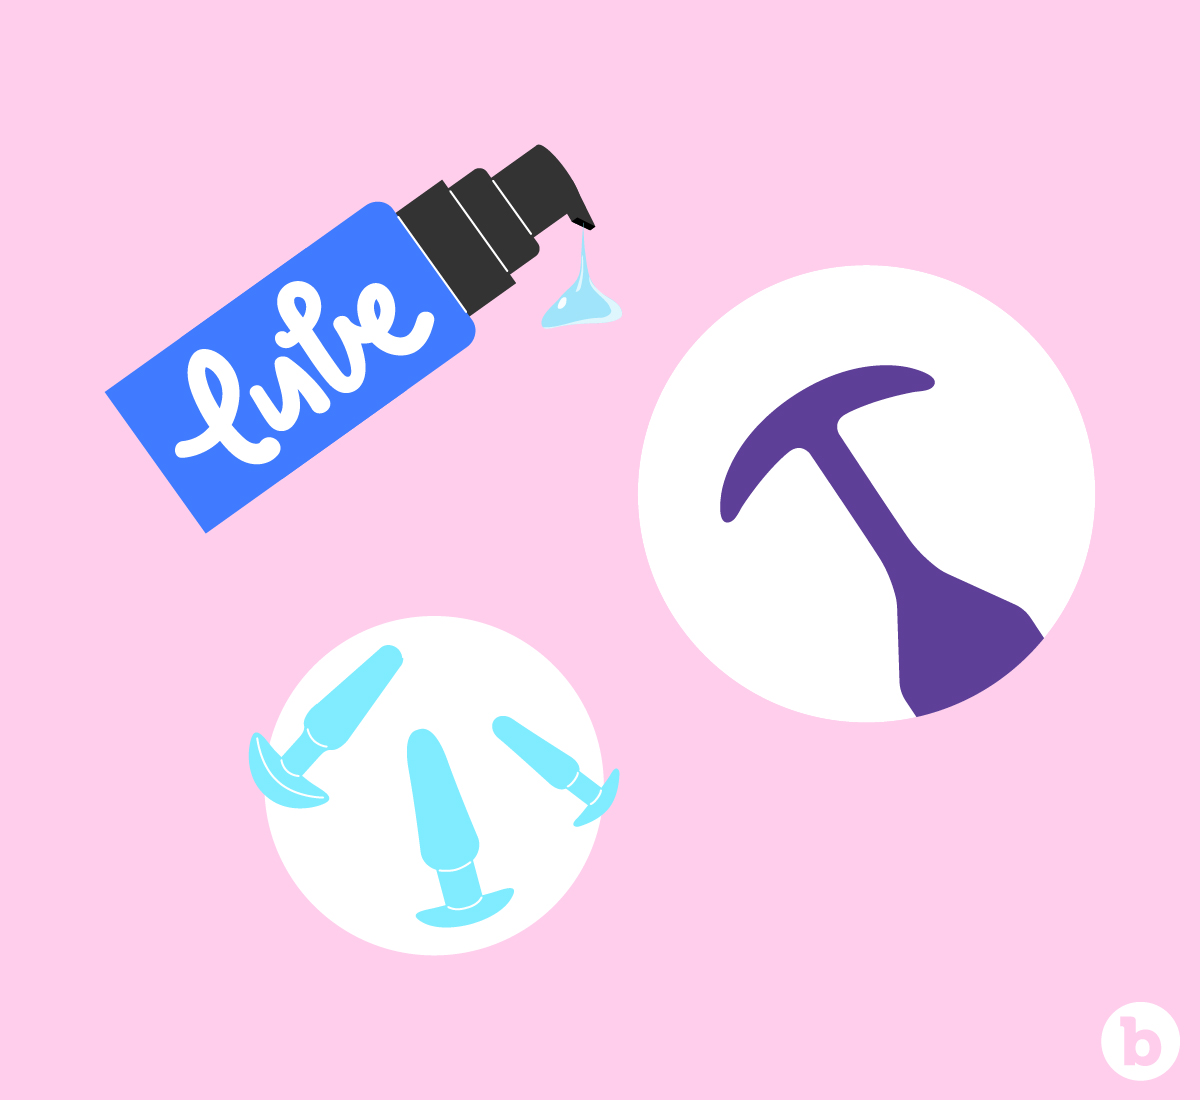 Lube is essential when using a rimming plug or any anal sex toy